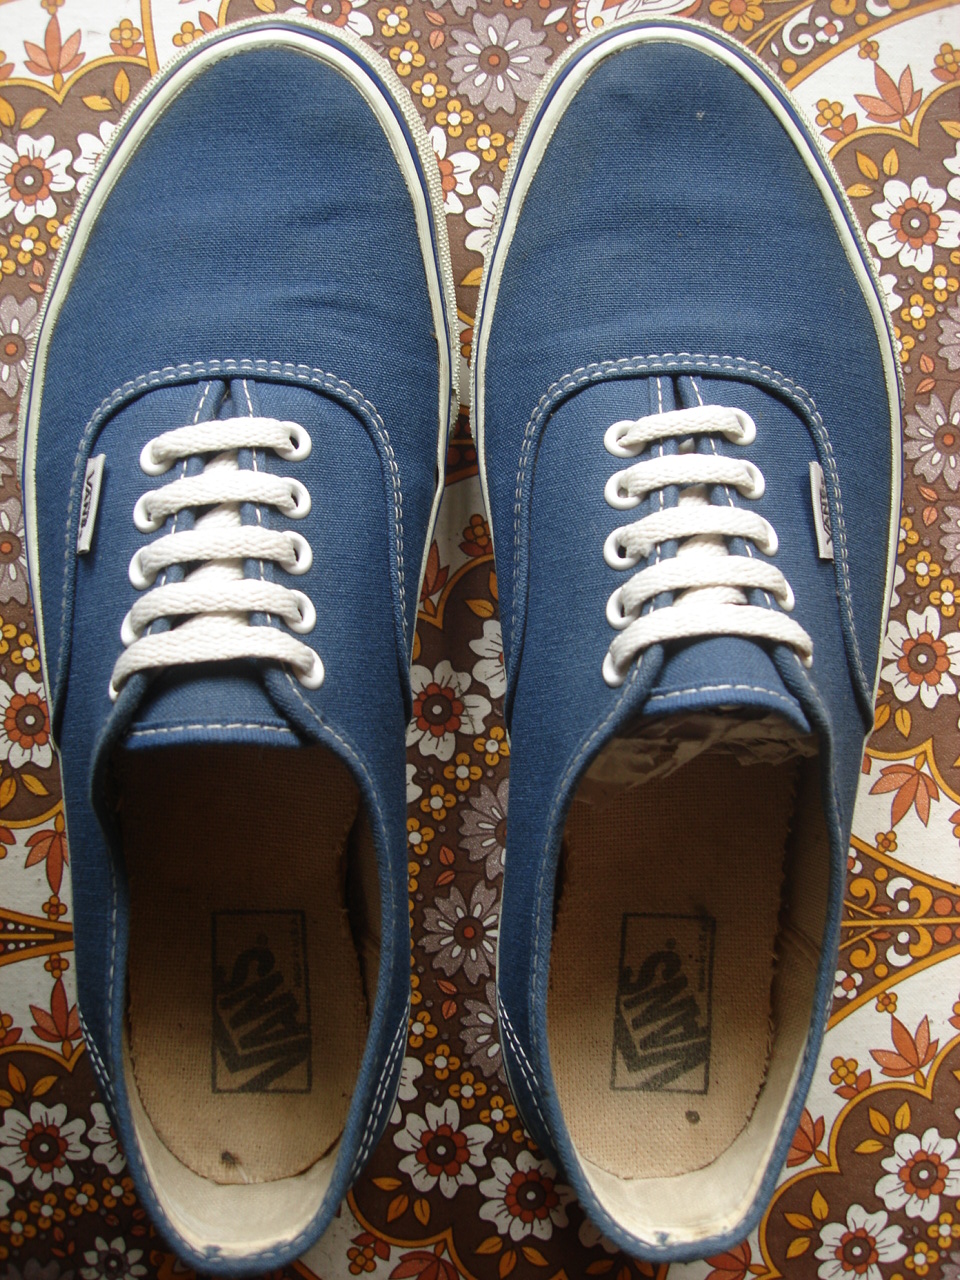 theothersideofthepillow: vintage VANS navy canvas style #44 authentic ...